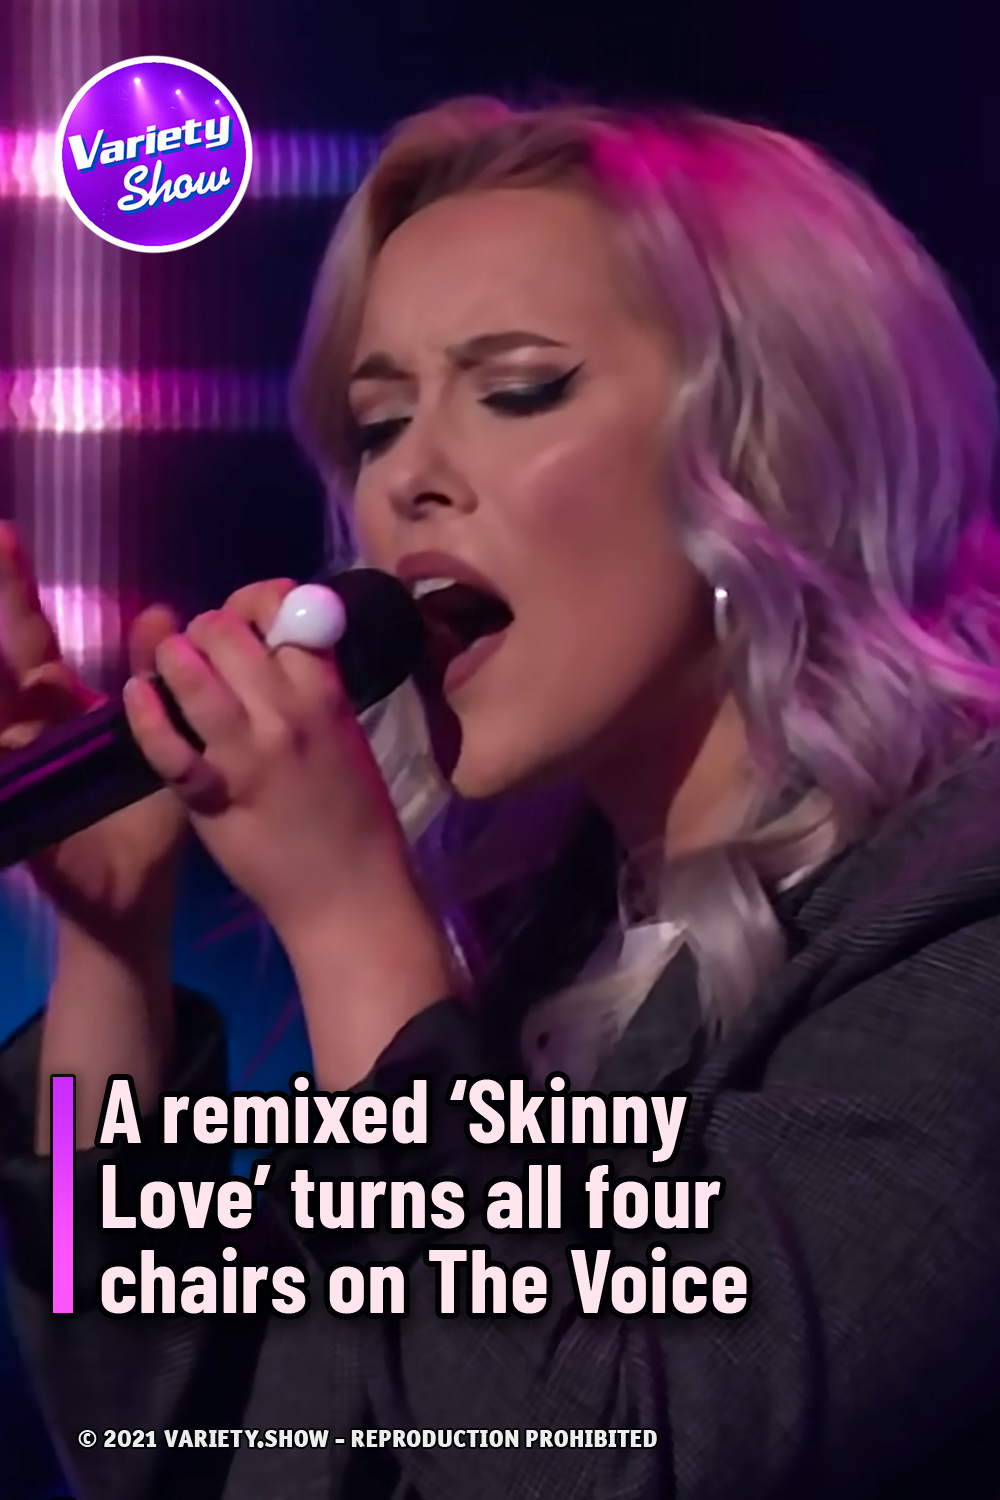 A remixed ‘Skinny Love’ turns all four chairs on The Voice